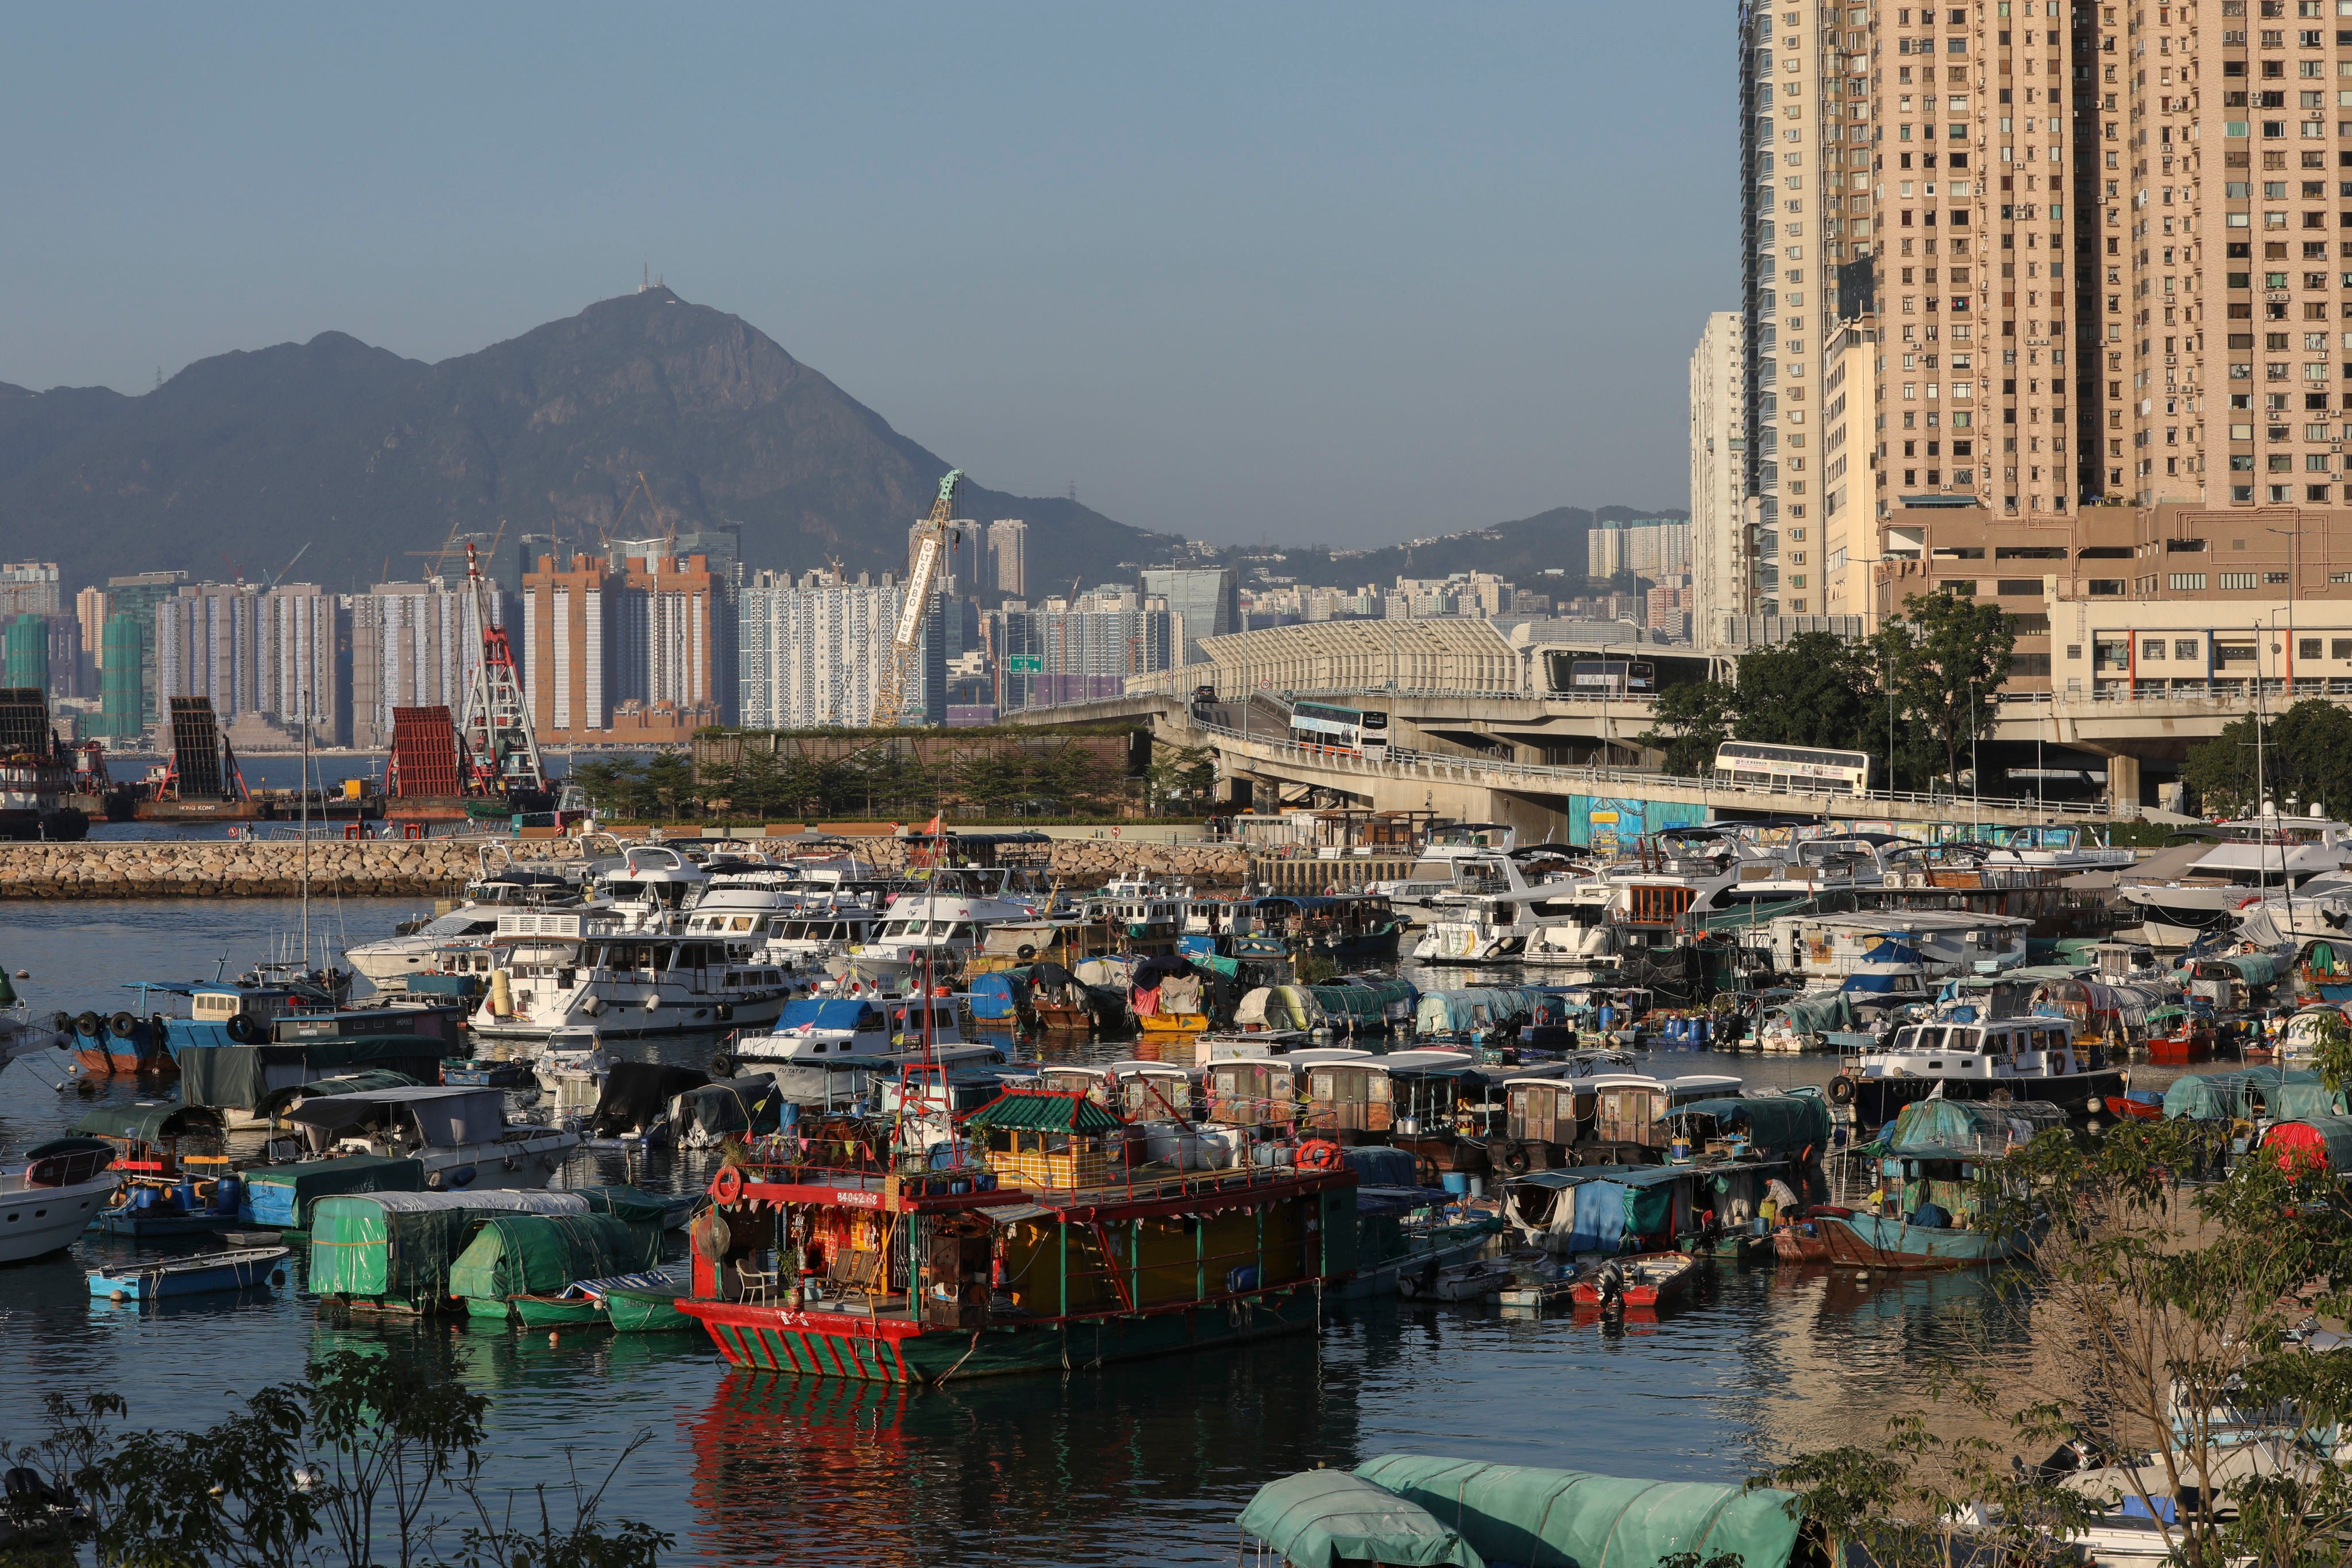 The floating Tin Hau temple (centre, foreground) in the Causeway Bay Typhoon Shelter against the backdrop of Kowloon (rear) and Tin Hau (right) on the north shore of Hong Kong Island. Photo: Antony Dickson